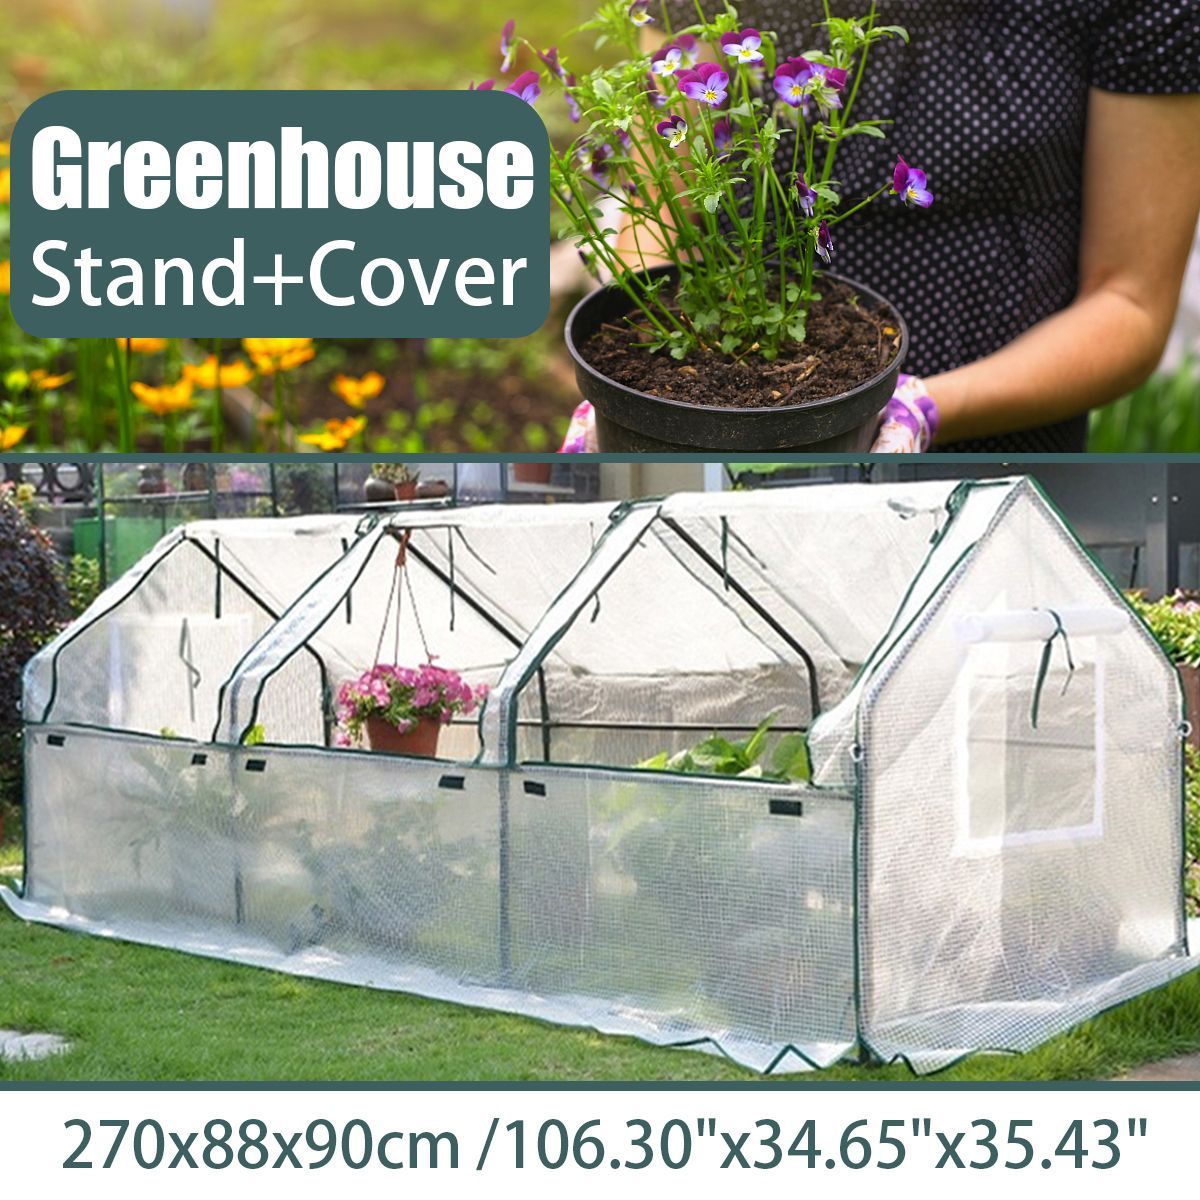 Waterproof-Warm-Garden-Greenhouse-Cover-Protects-3-Grids-Full-Package-Plants-1708211